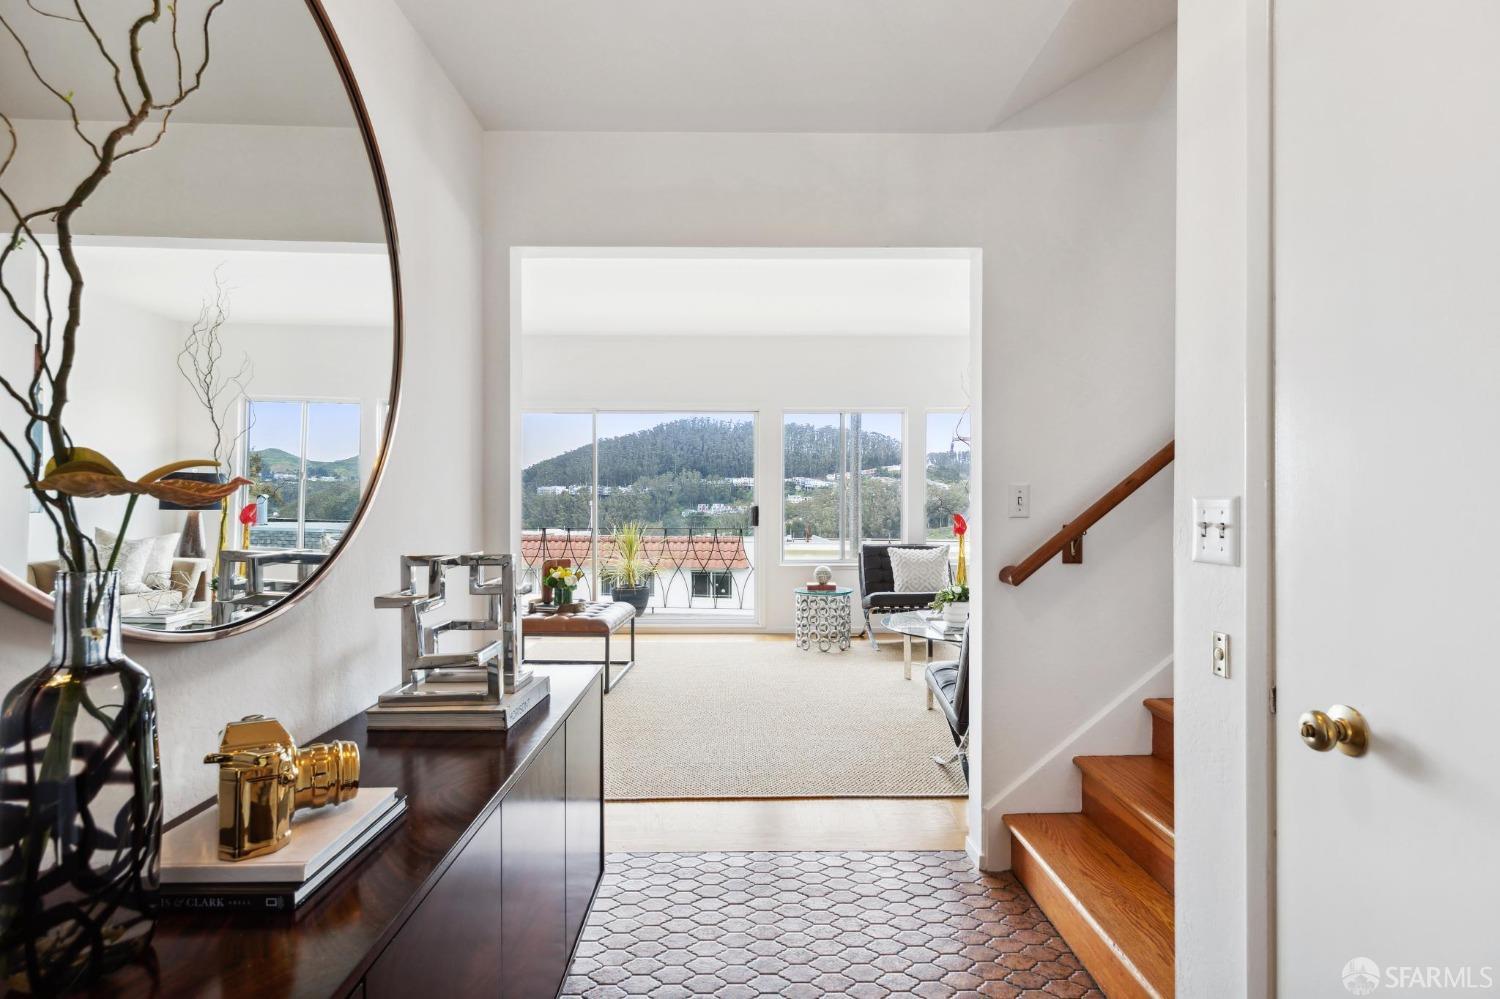 Upon entering the home, you are immediately greeted by the view.